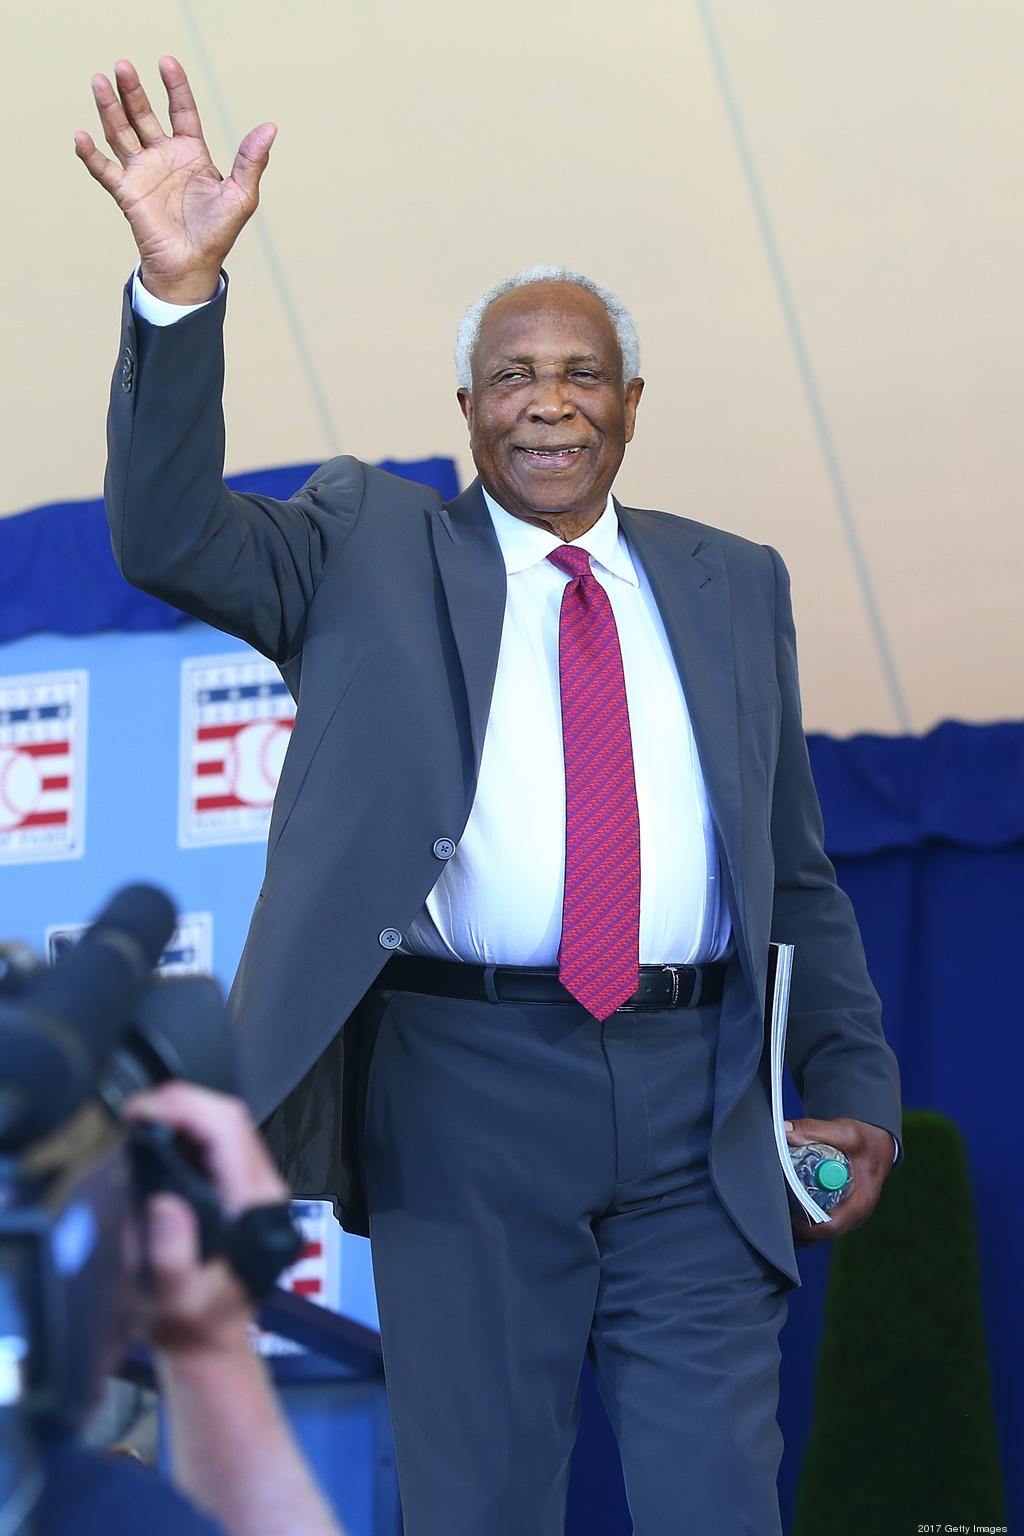 Reds' Frank Robinson Smiling for Camera News Photo - Getty Images